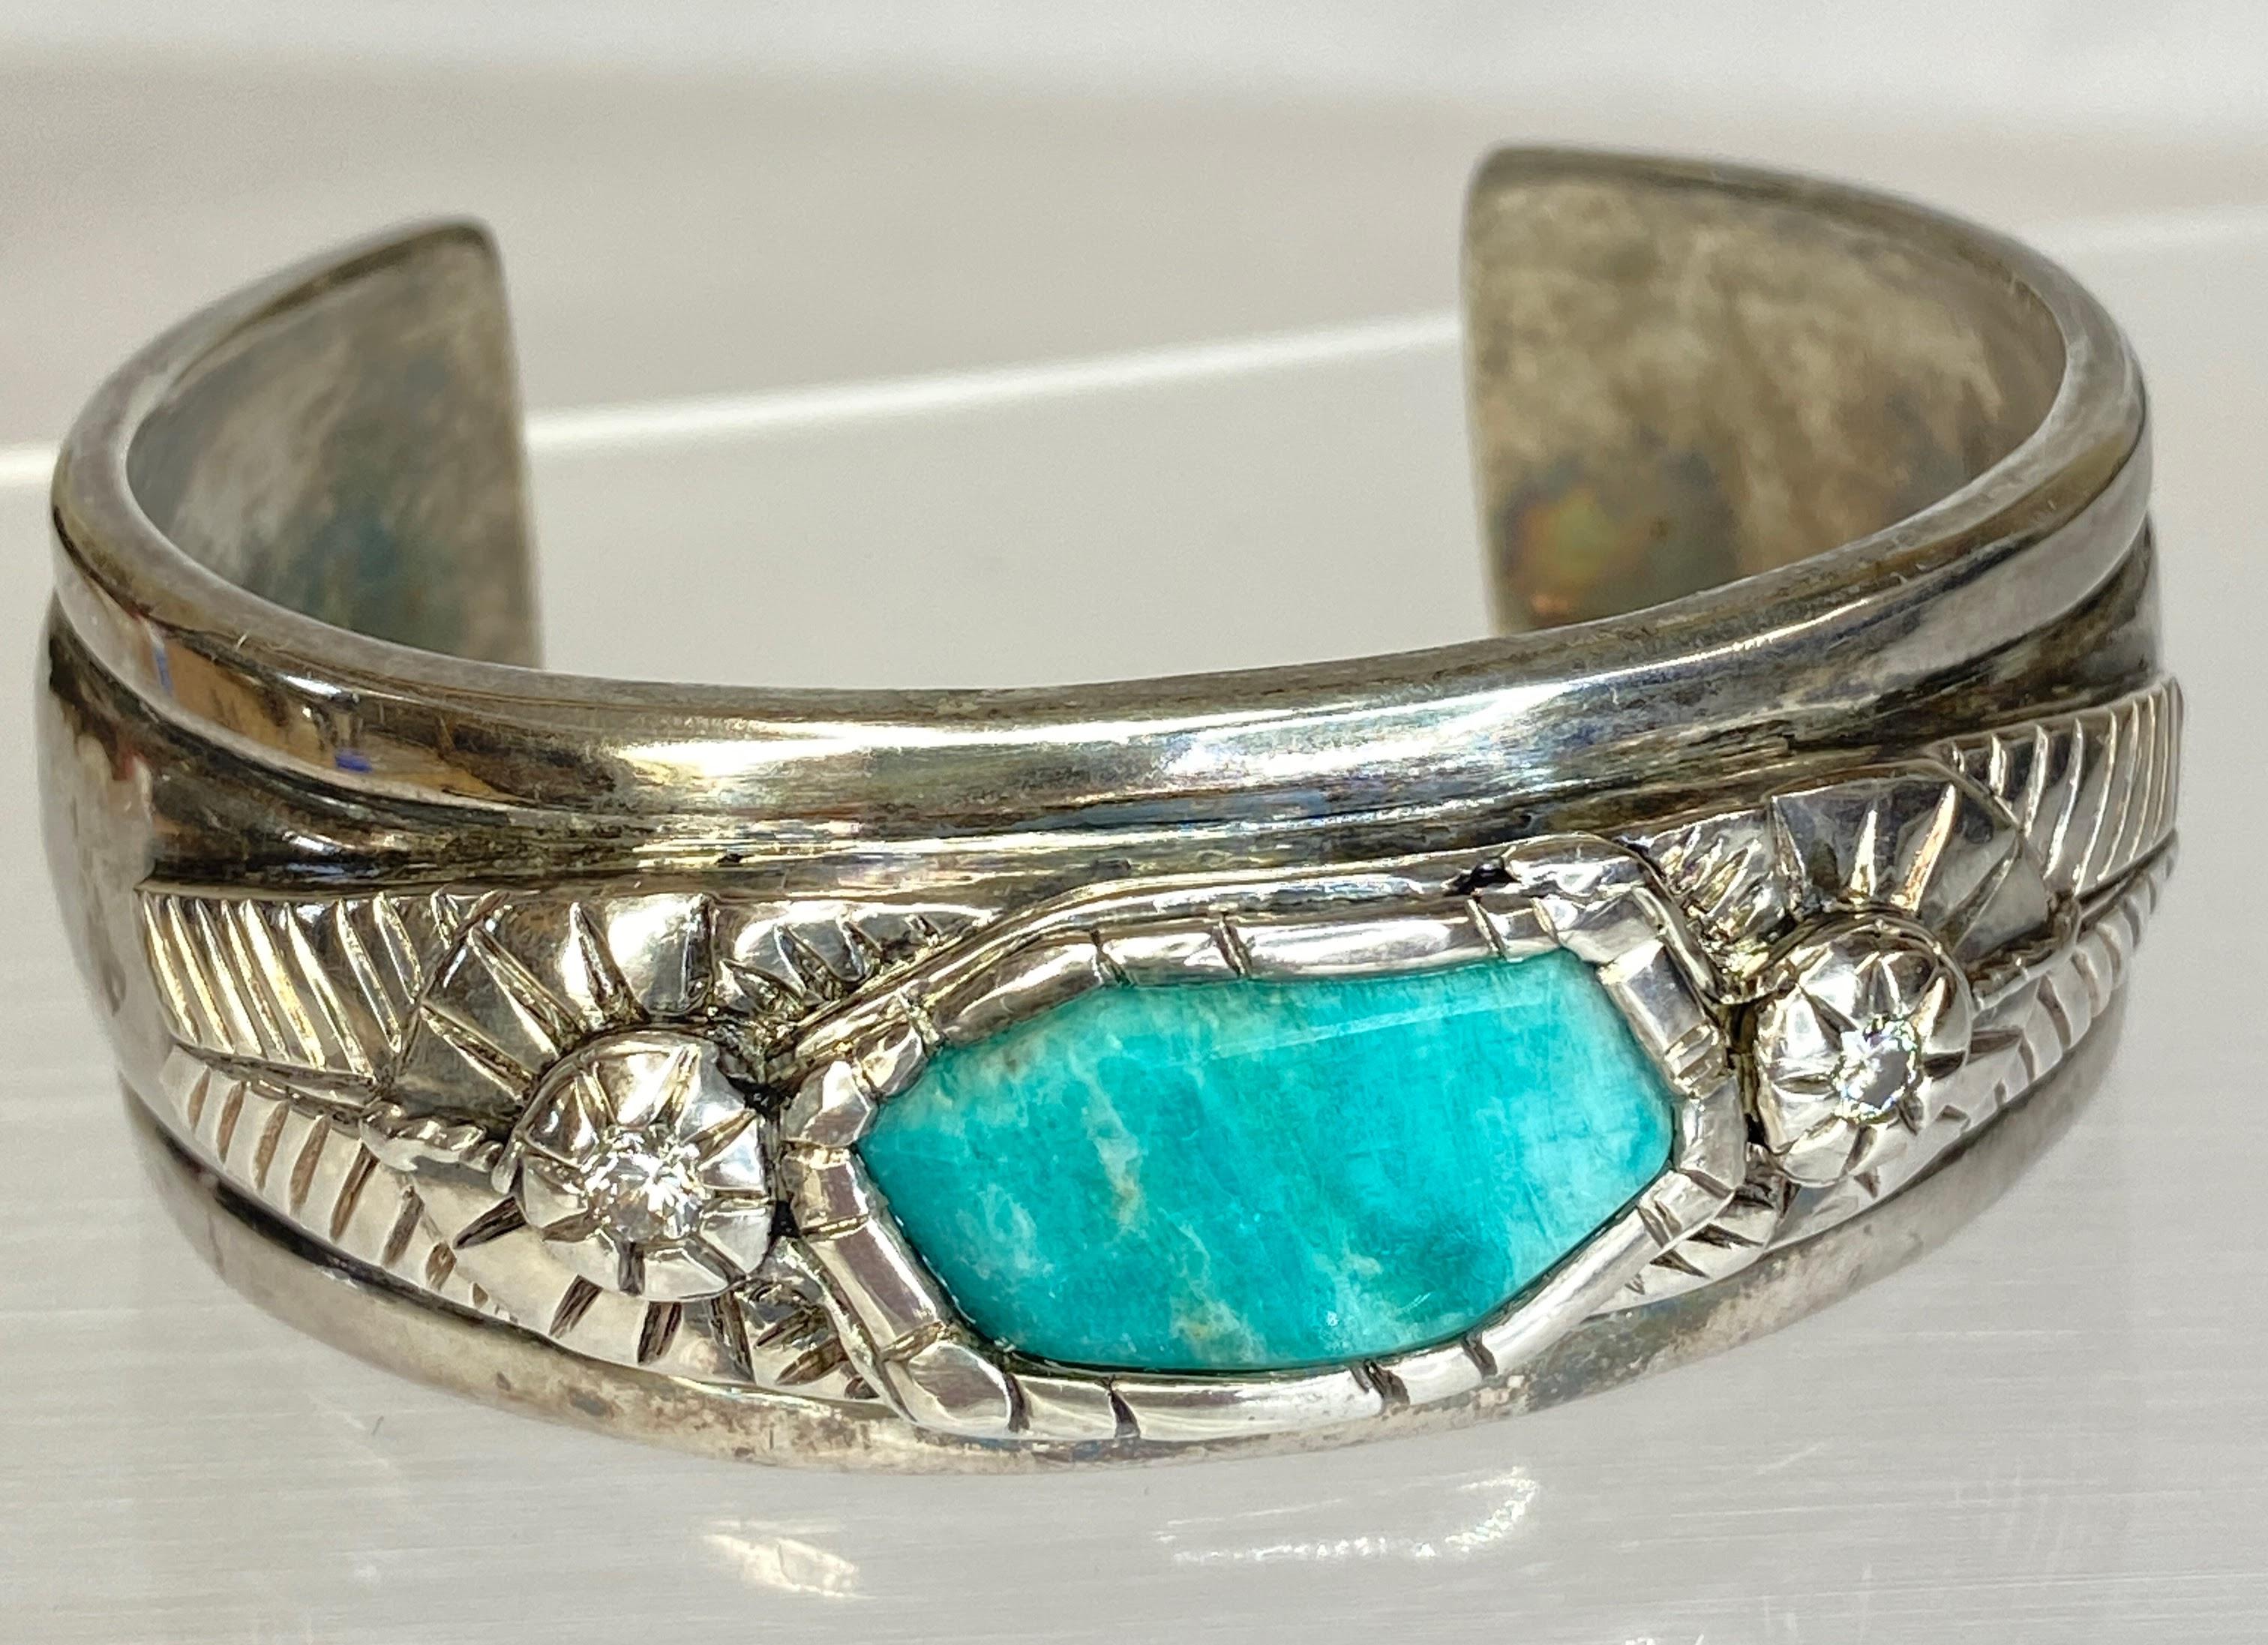 Sterling Silver Early Native Cuff Bracelet 5.83TCW Diamonds & Amazonite


Metal Purity: 925
Metal Type: Silver
Main Stone: Amazonite
Stone Size/Carats: 11.4mm x 22.8mm/ 5.61ct (by formula)
Second Stone: Diamond
Stone Size/Carats: 2.9mm round/ 0.11ct